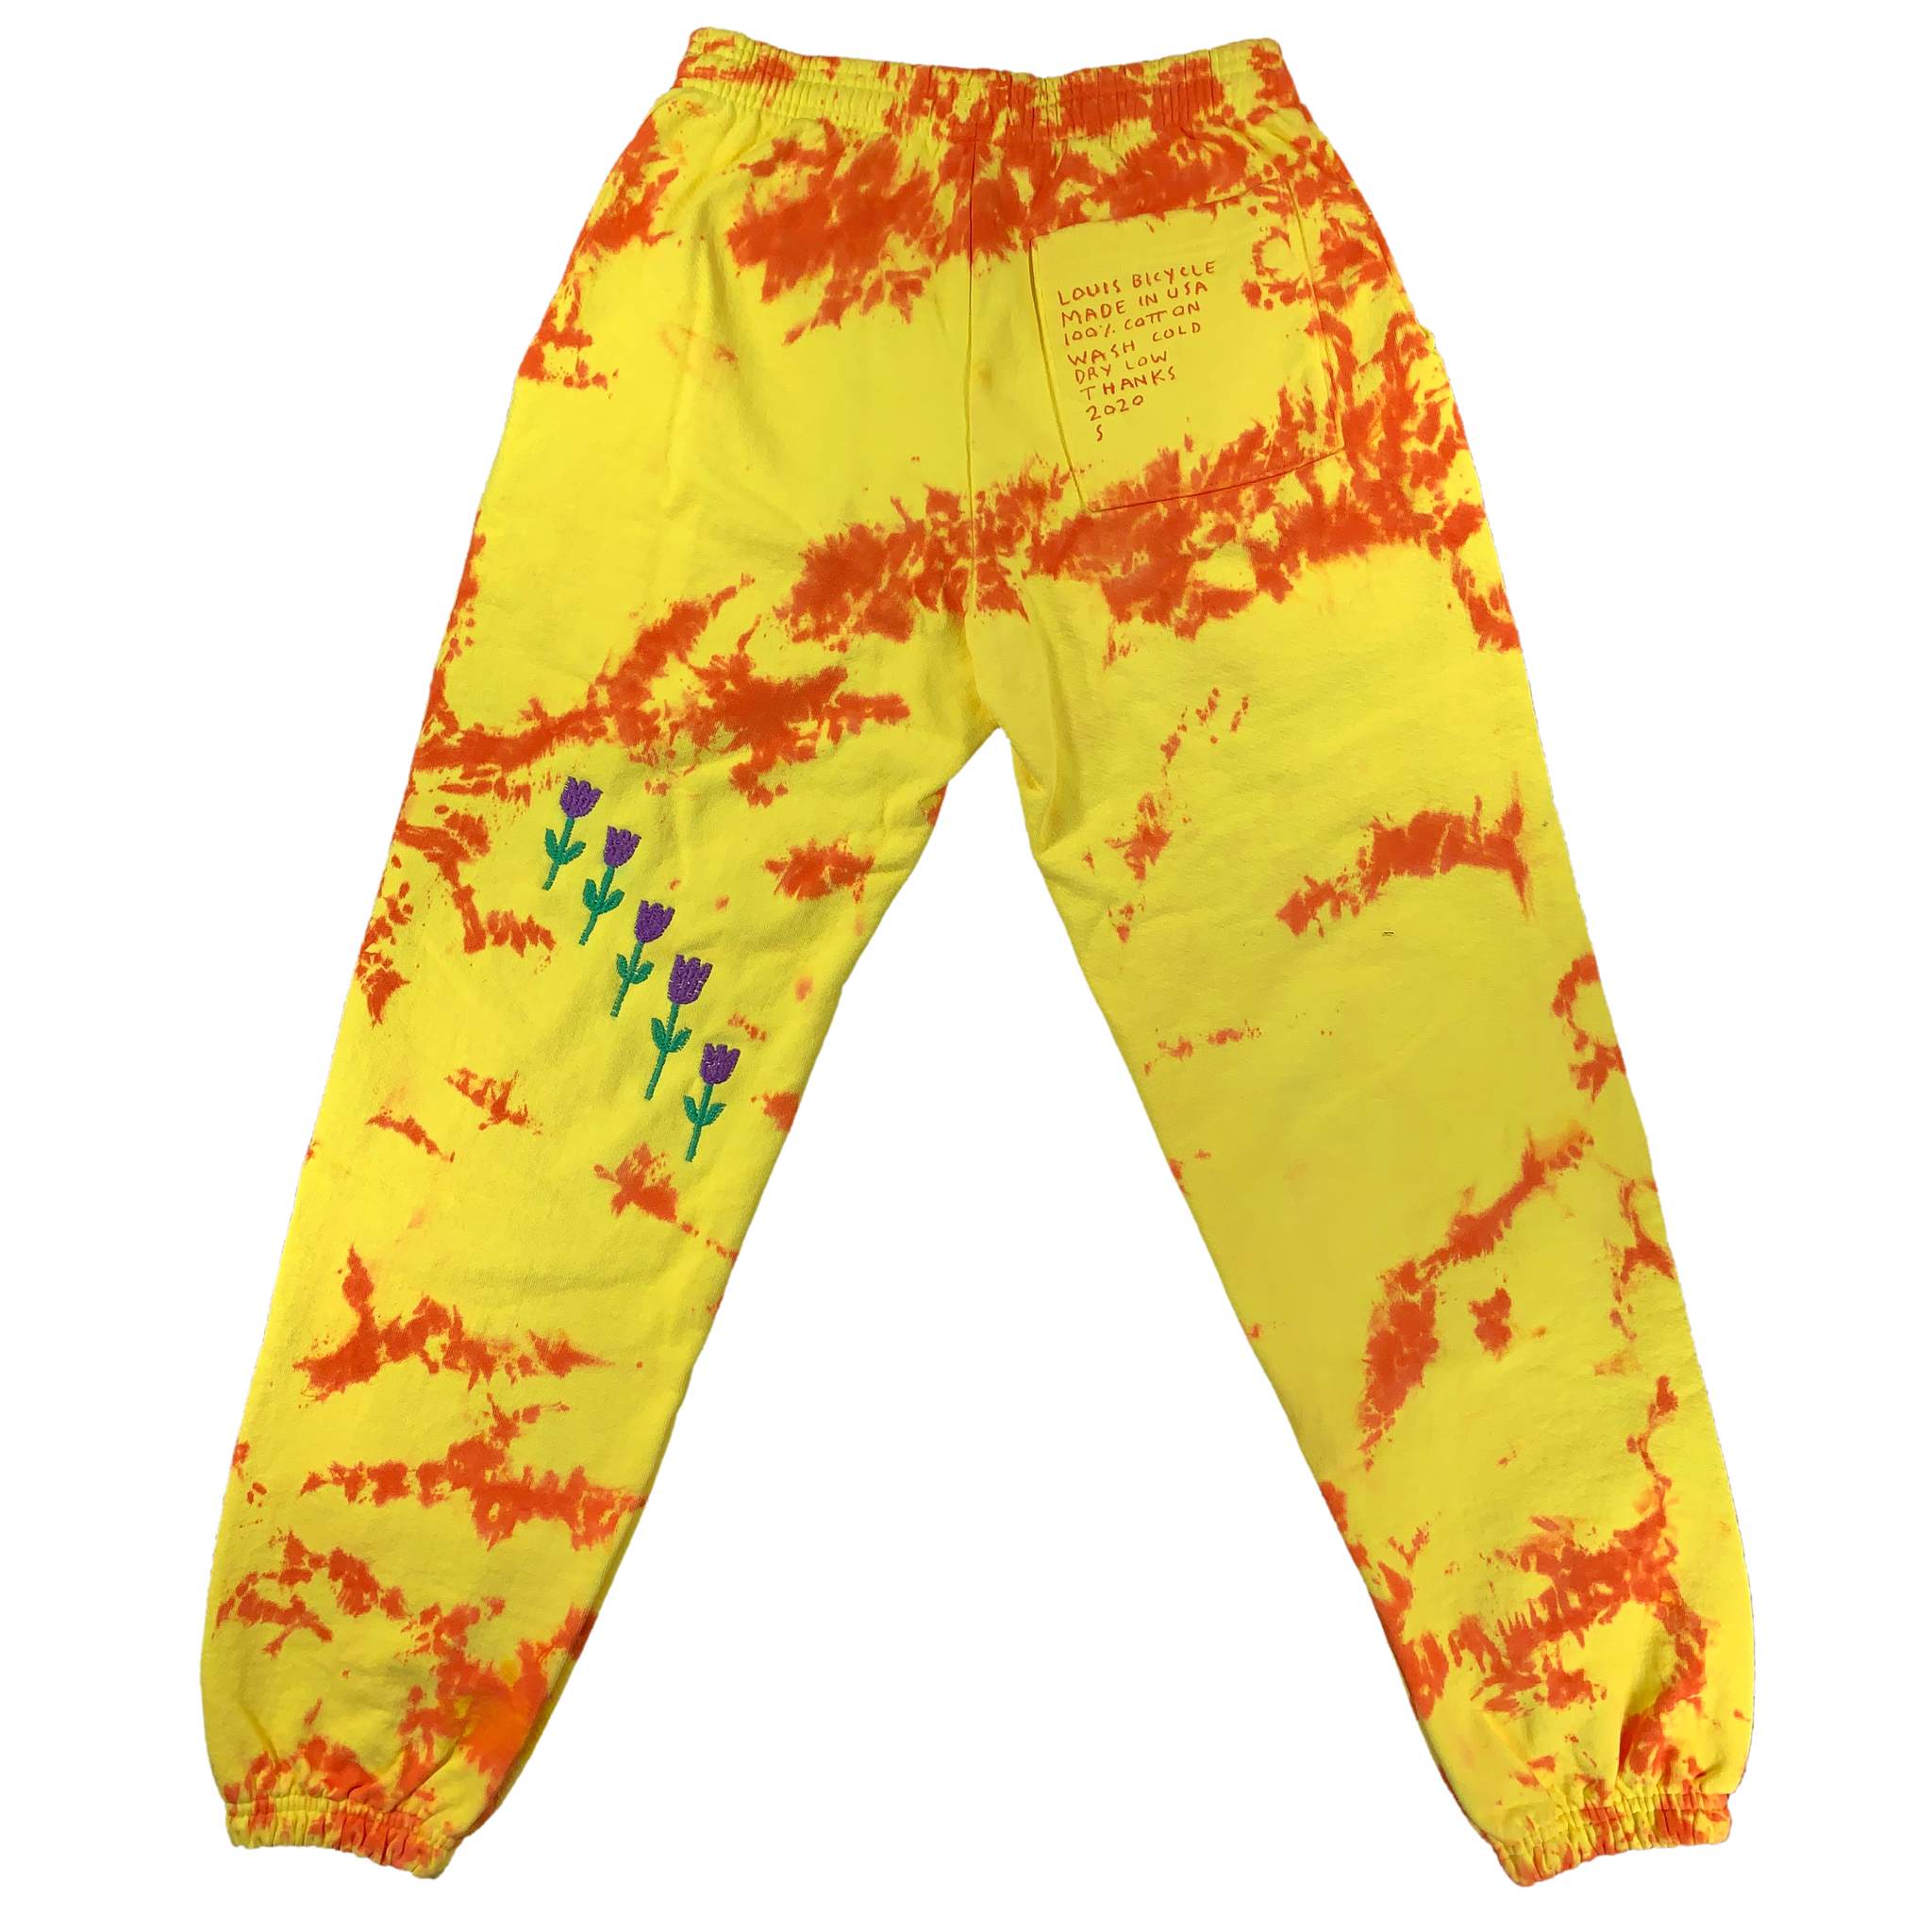 Embroidered and Dyed Sweatpants - Small